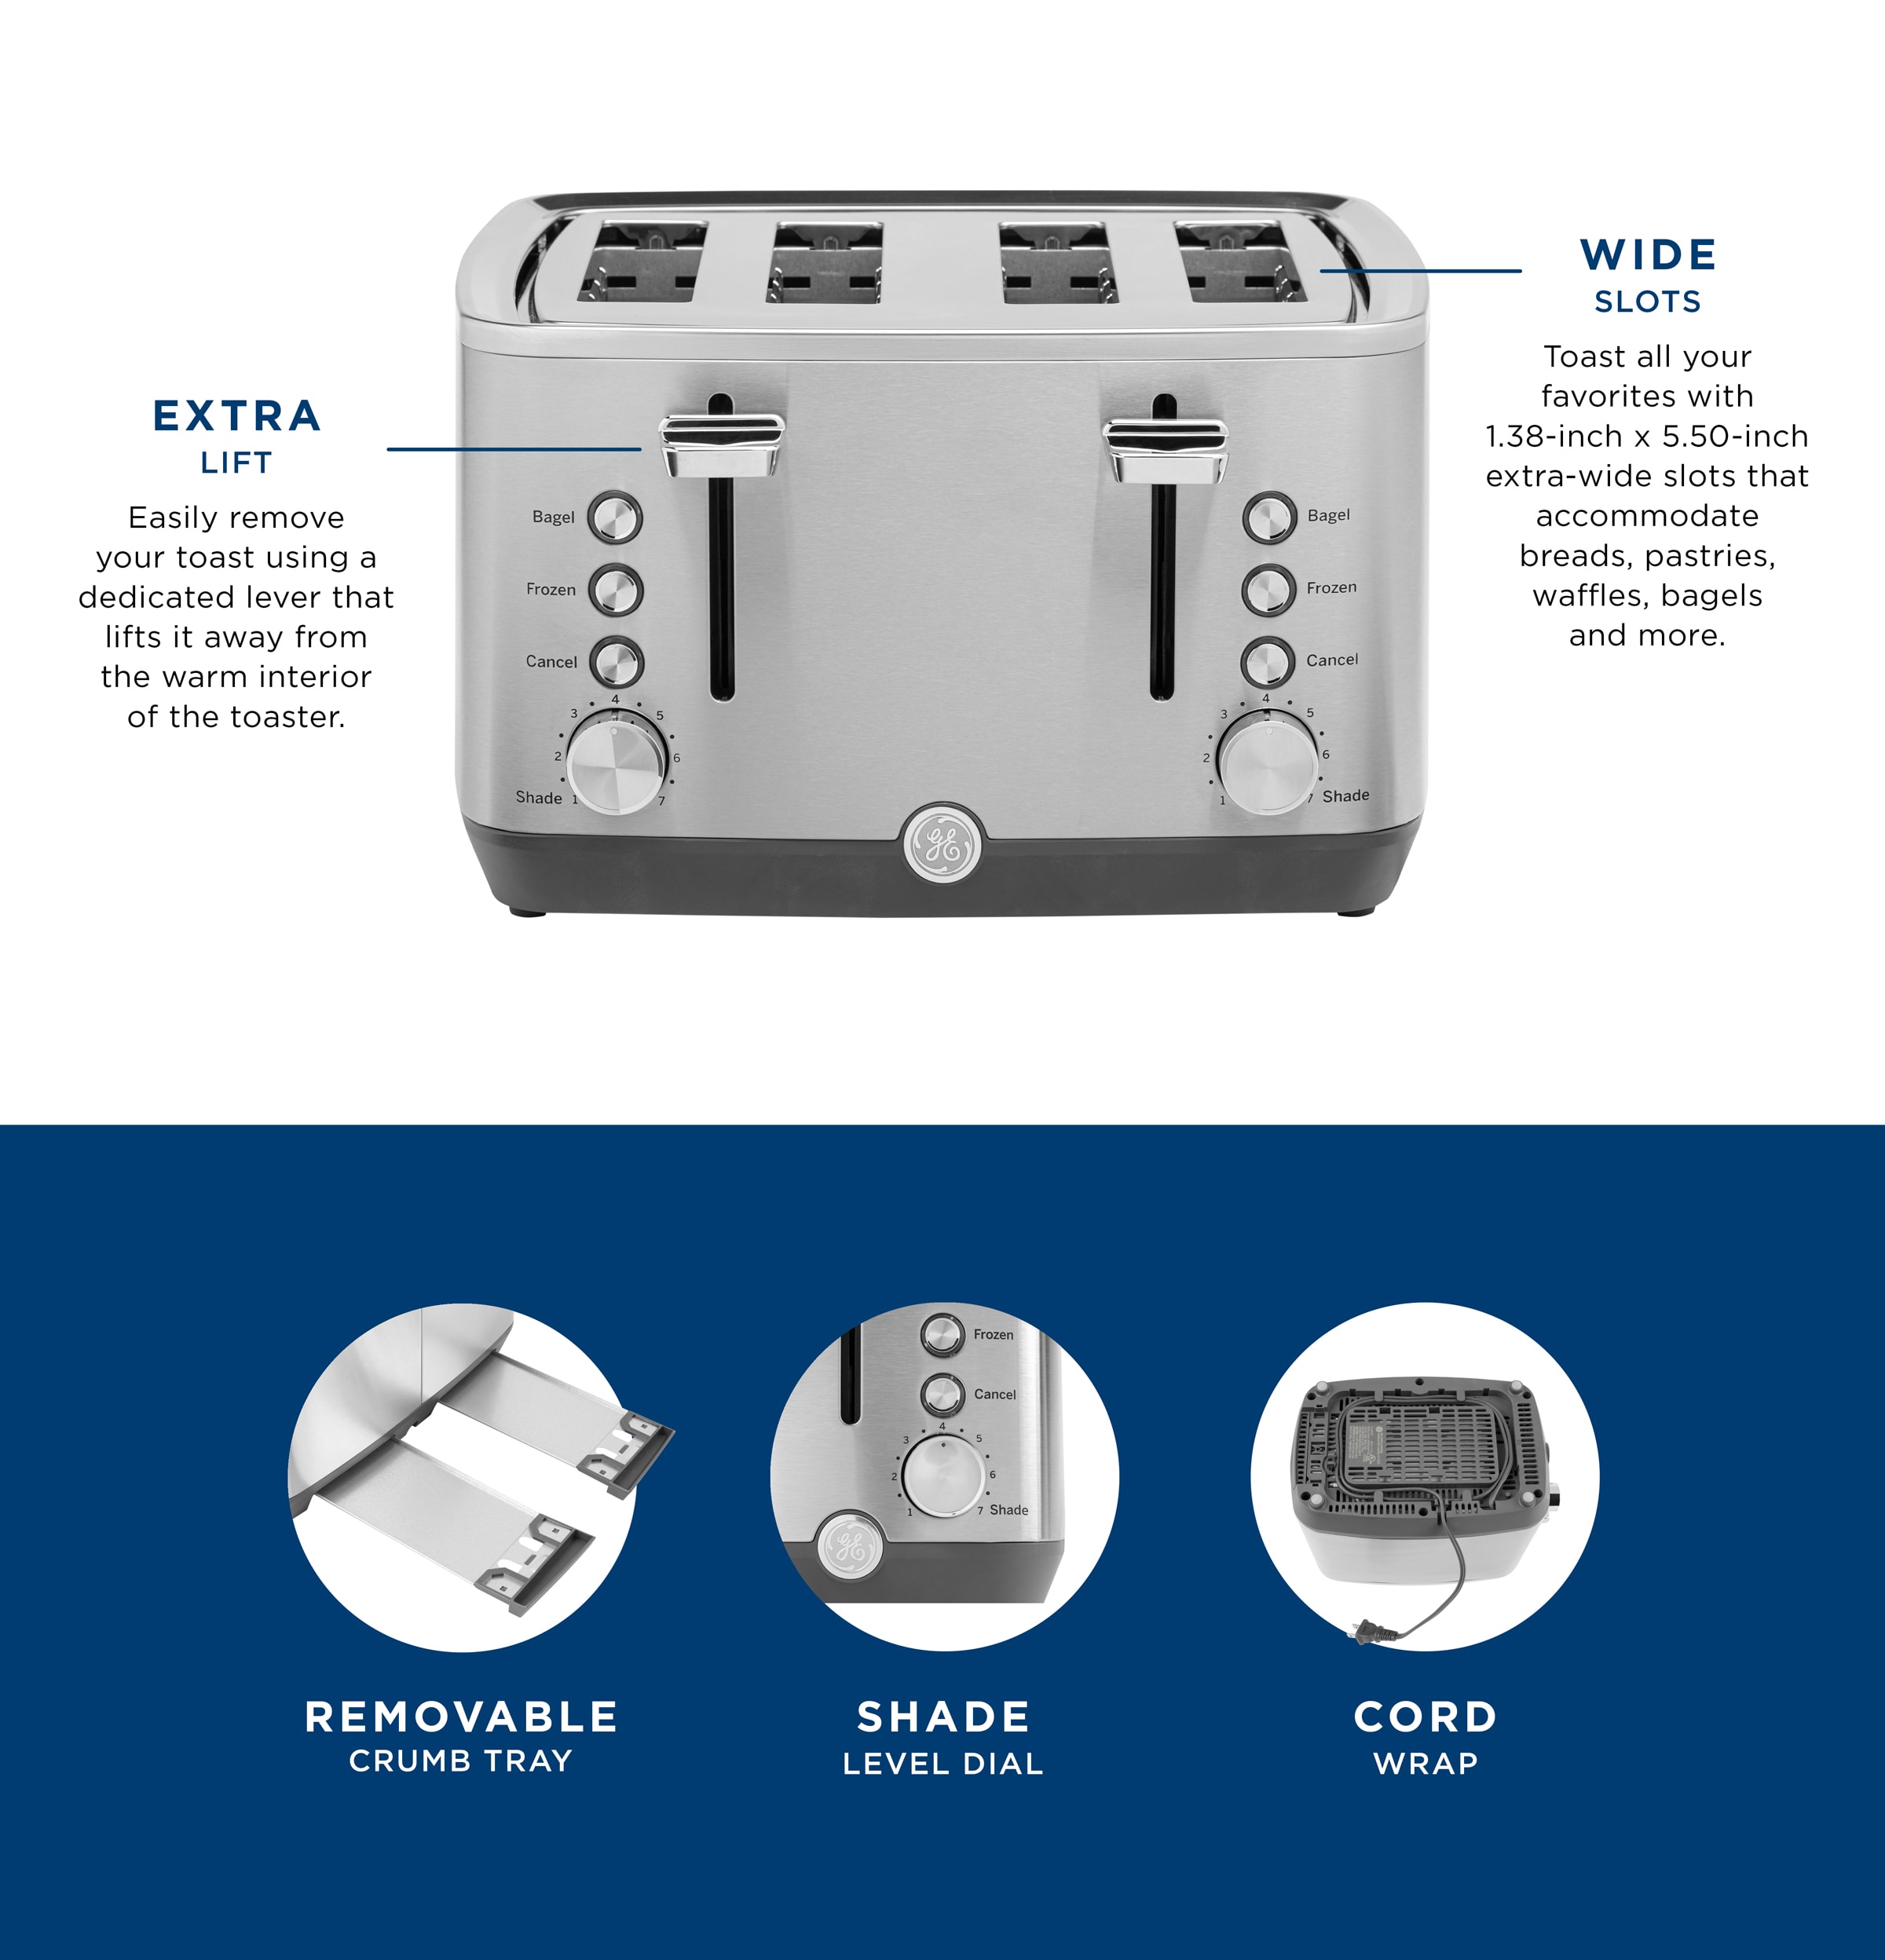 GE 4-Slice Toaster Review 